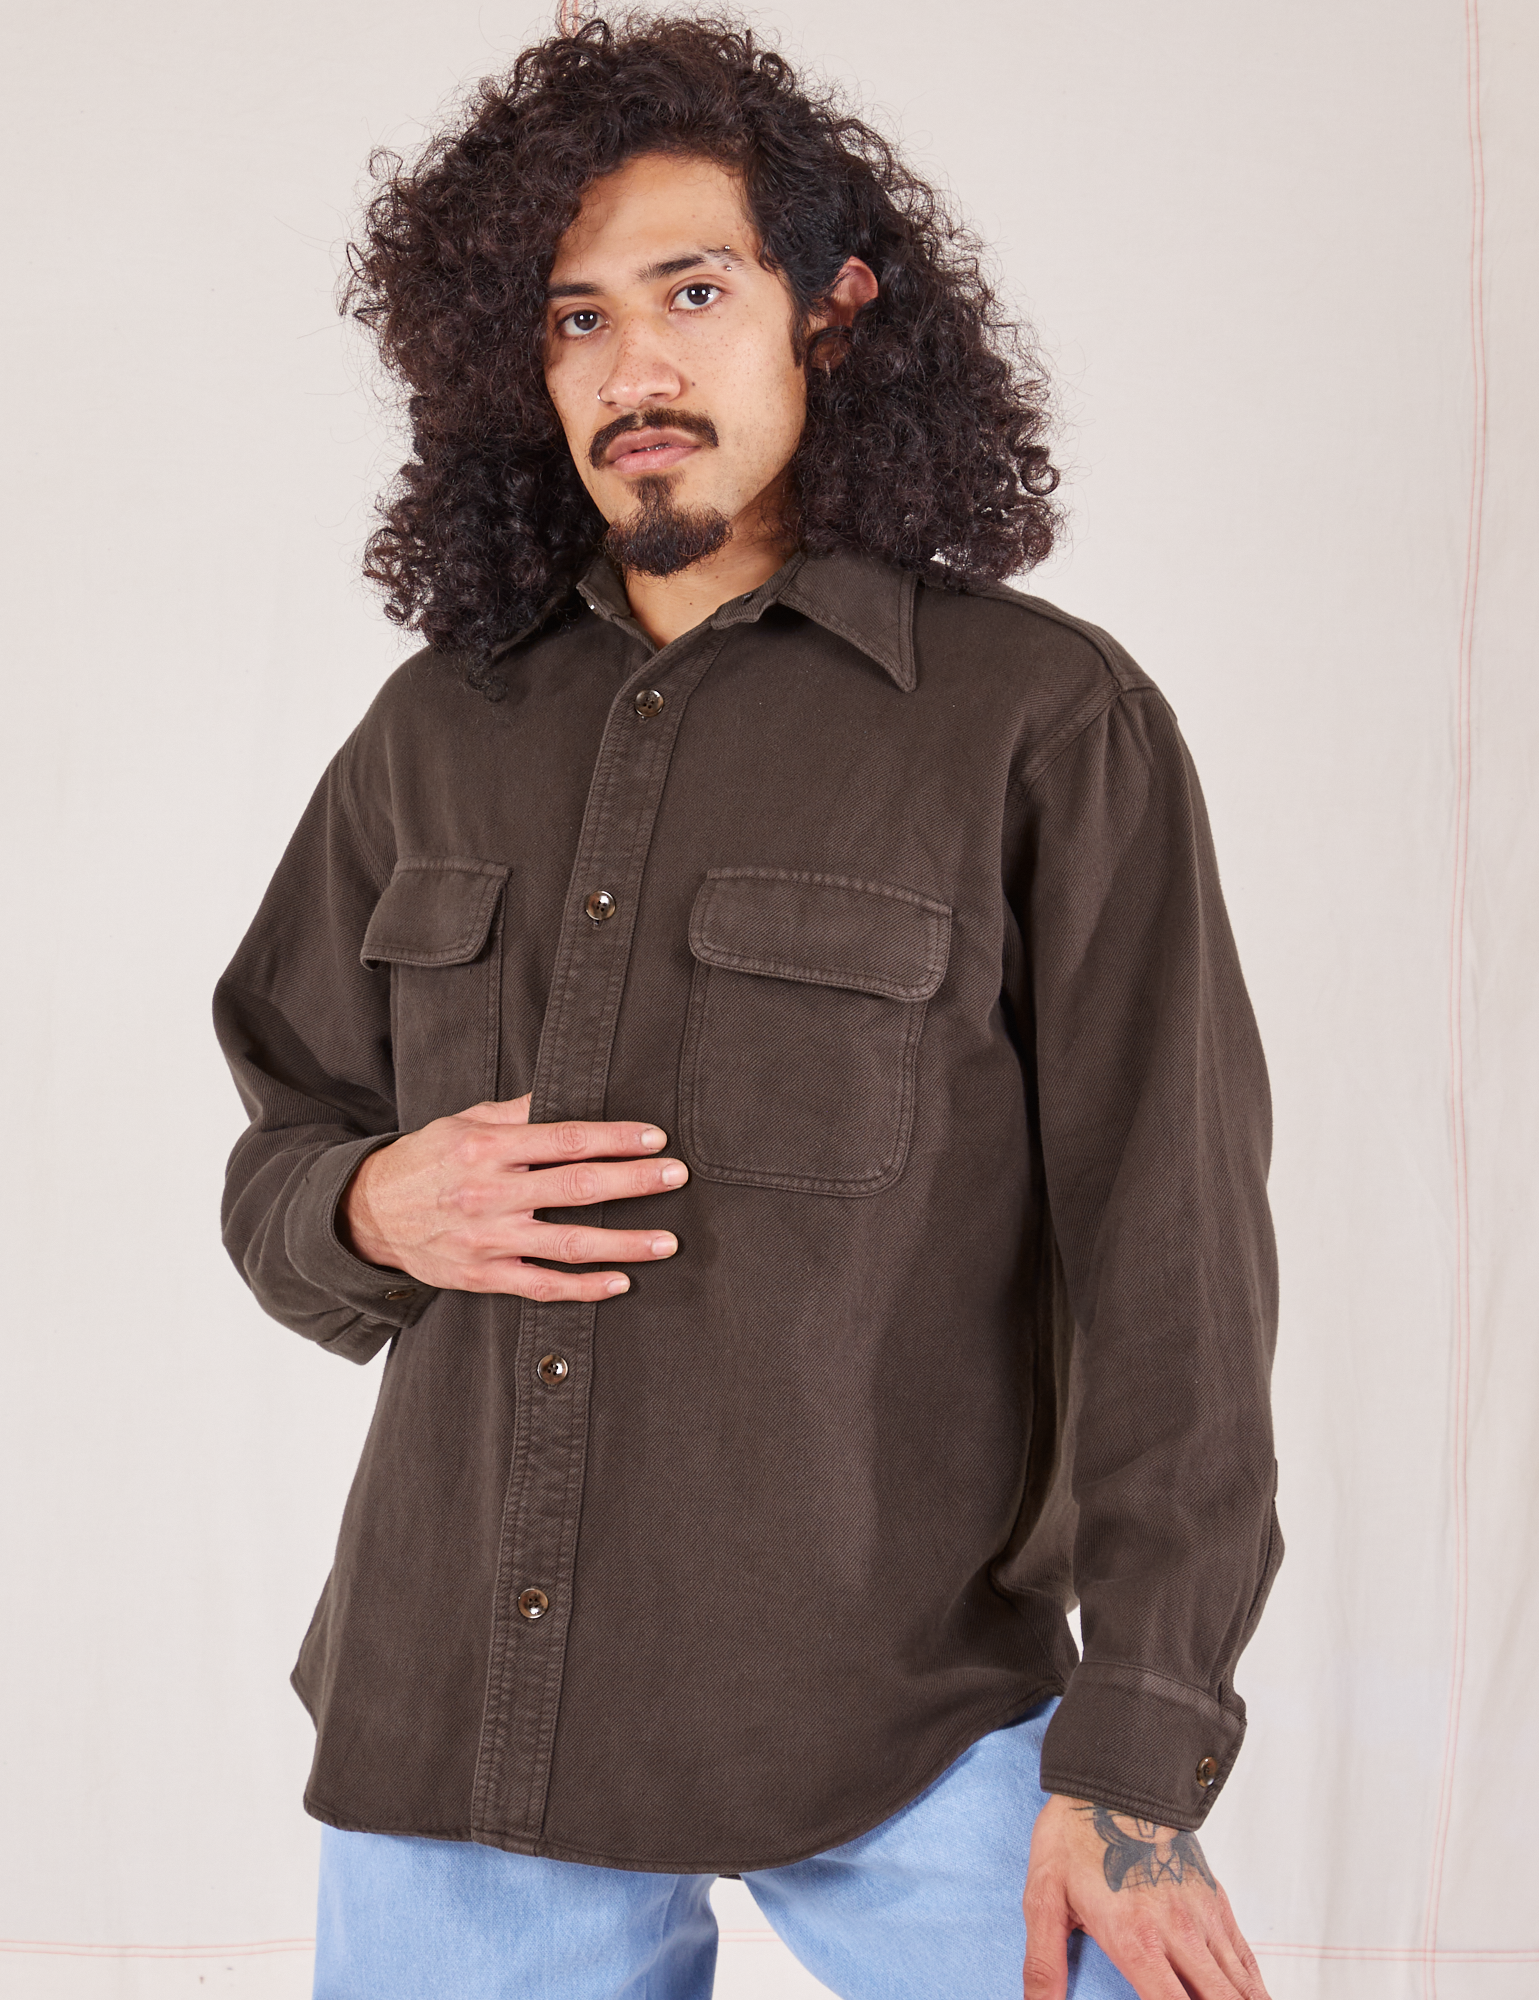 Jesse is 5&#39;8&quot; and wearing XS Flannel Overshirt in Espresso Brown